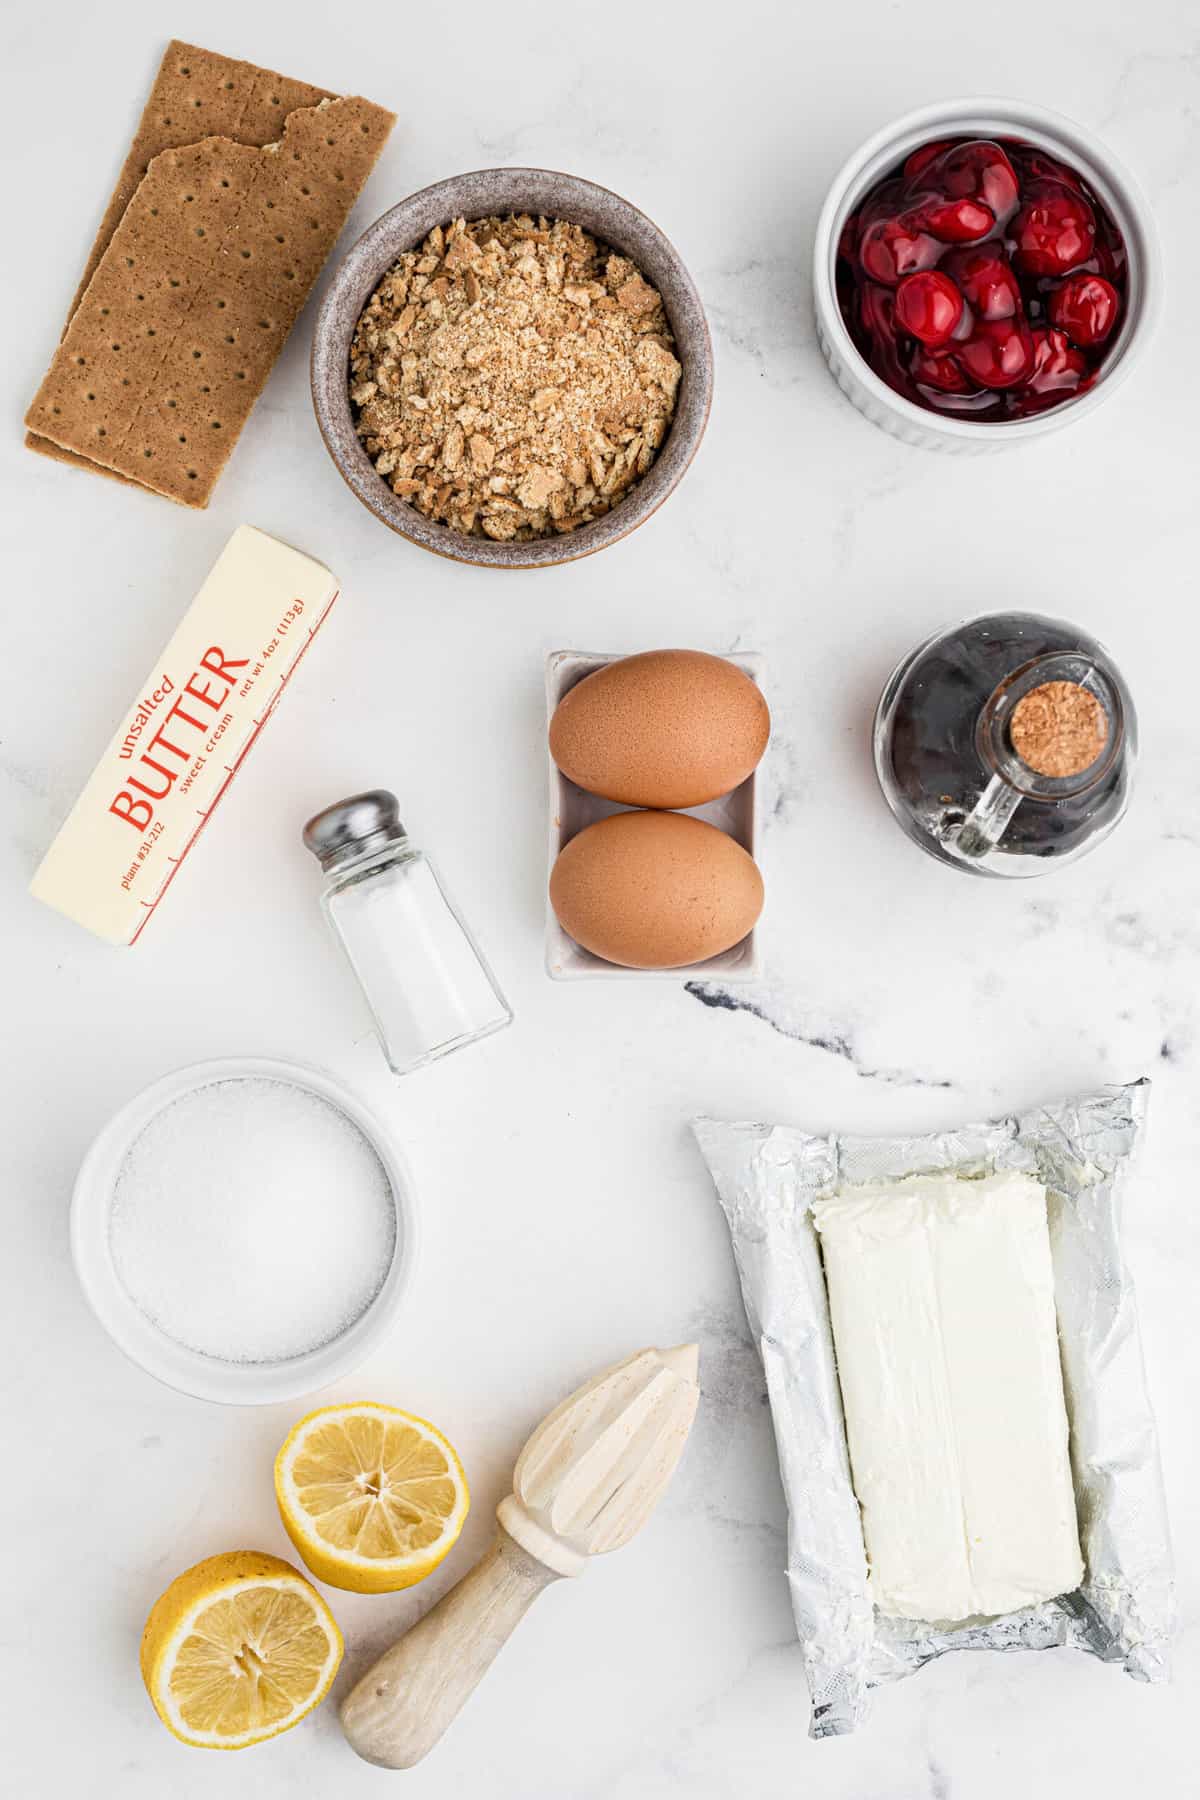 The ingredients for mini cherry cheesecakes are placed on a white surface. 